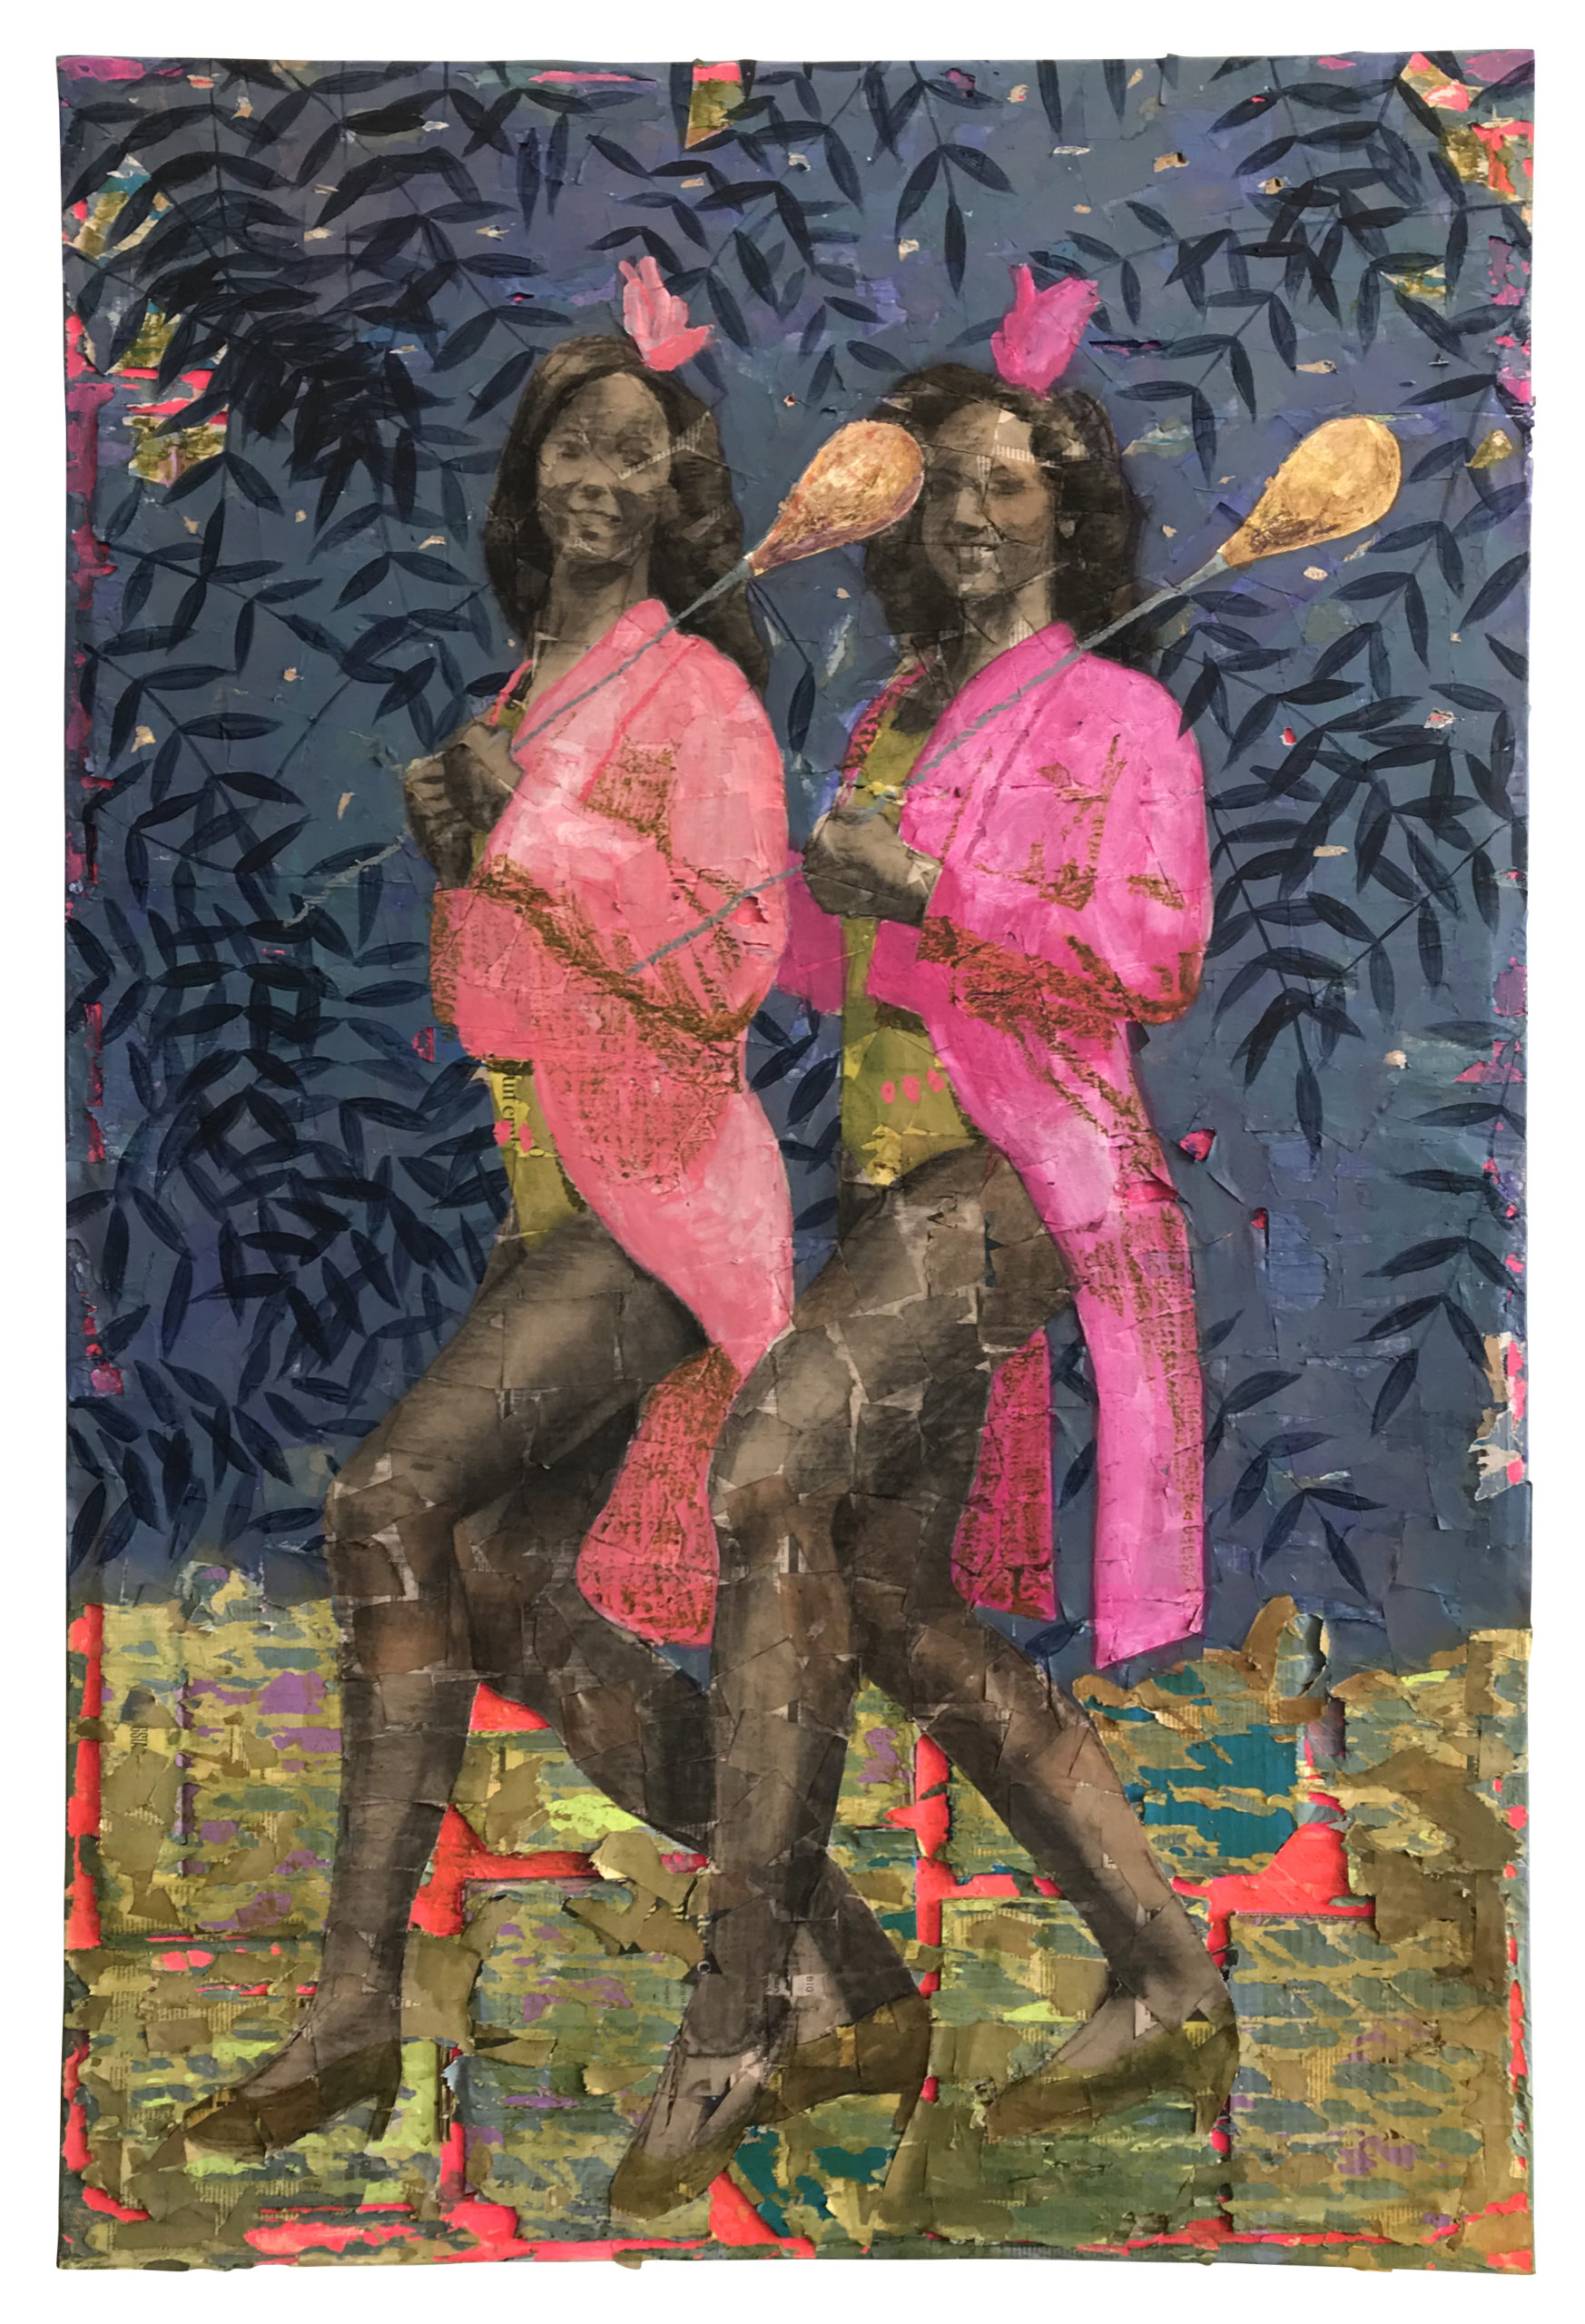 A painting of two people posing identically, dressed in pink jackets, mustard shorts and heels with bright pink flowers in their hair. The pink contrasts sharply with the navy leaves in the background.